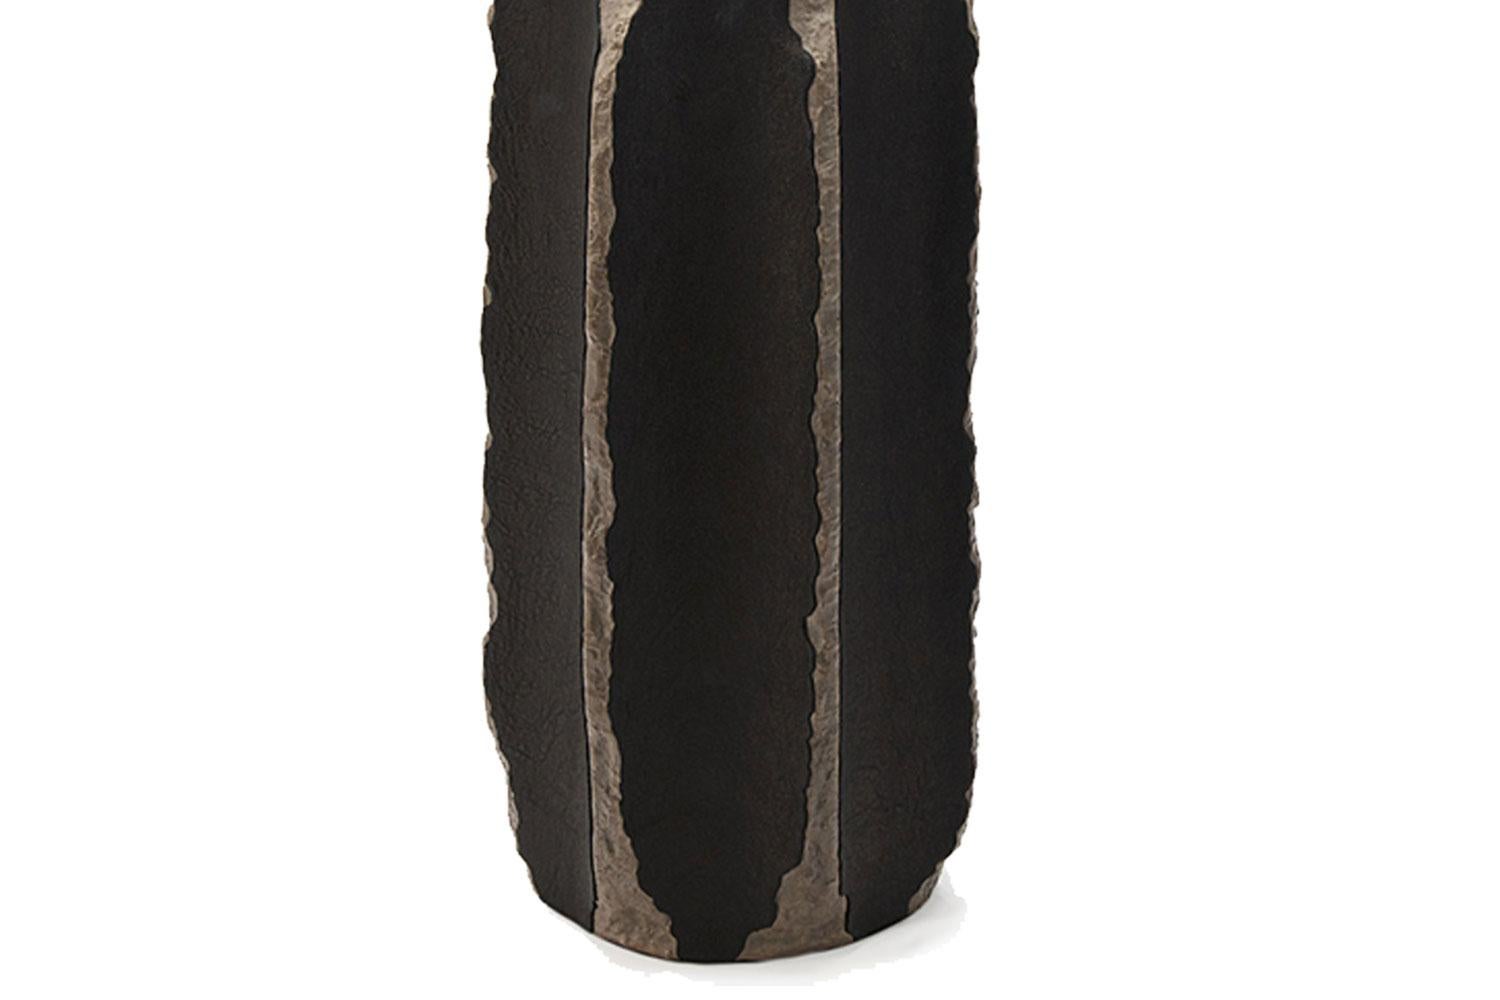 This handbuilt, nature inspired, textural lamp has ceramic base with black leather appliqué has a linen lamp shade and is made by French artist Gilles Caffier. 

Renowned for his unique and limited edition pieces, Gilles Caffier creates topical